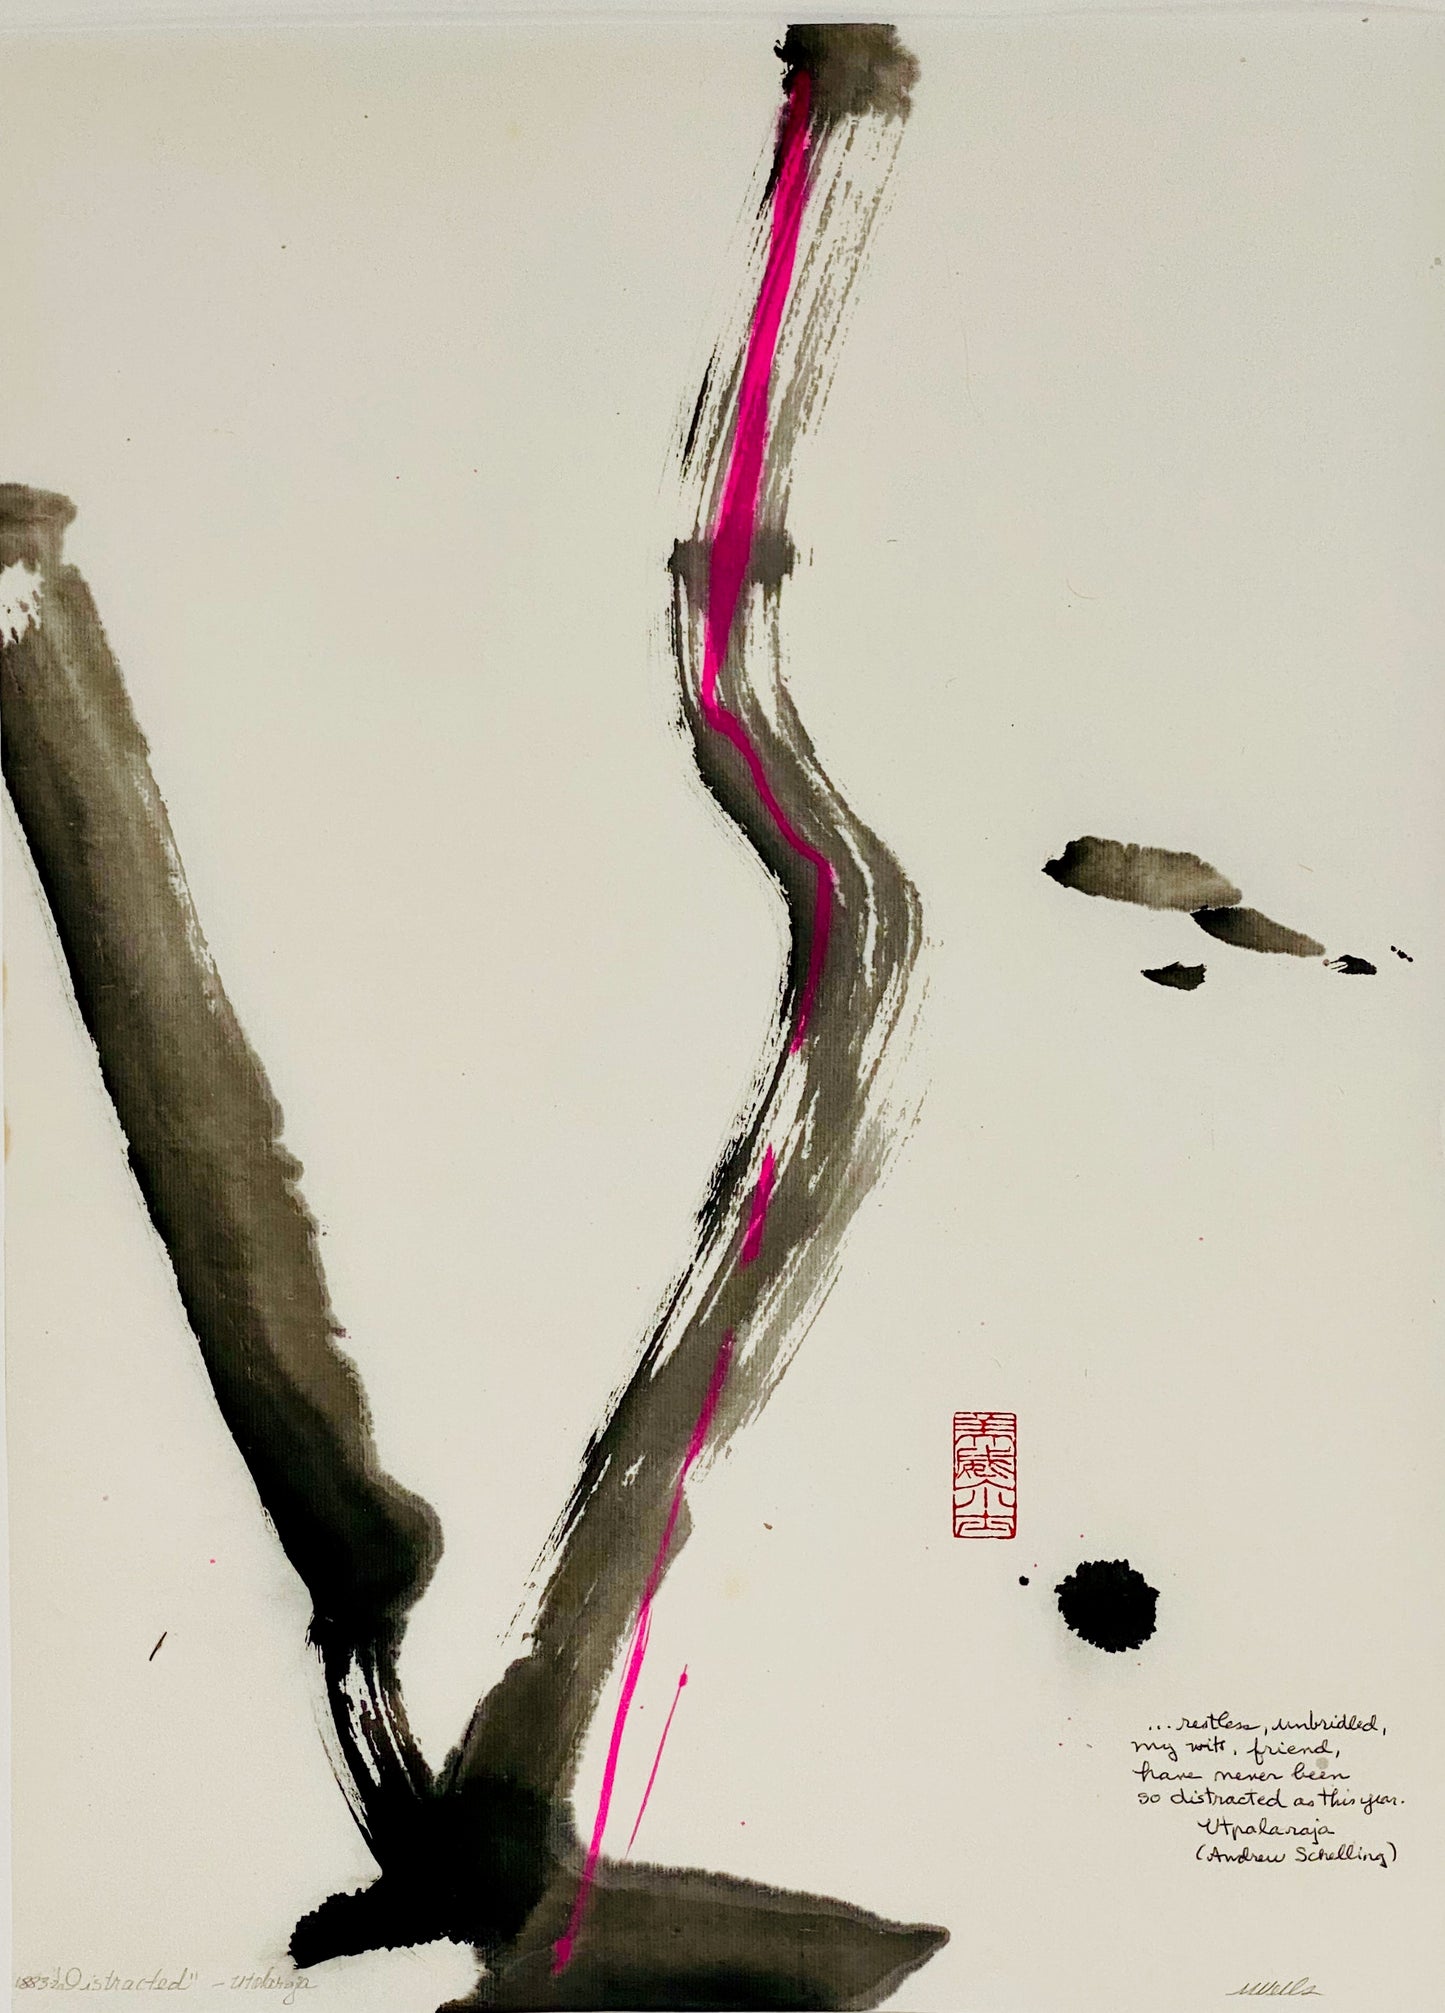 Abstract sumi e print “Distracted” by Marilyn Wells